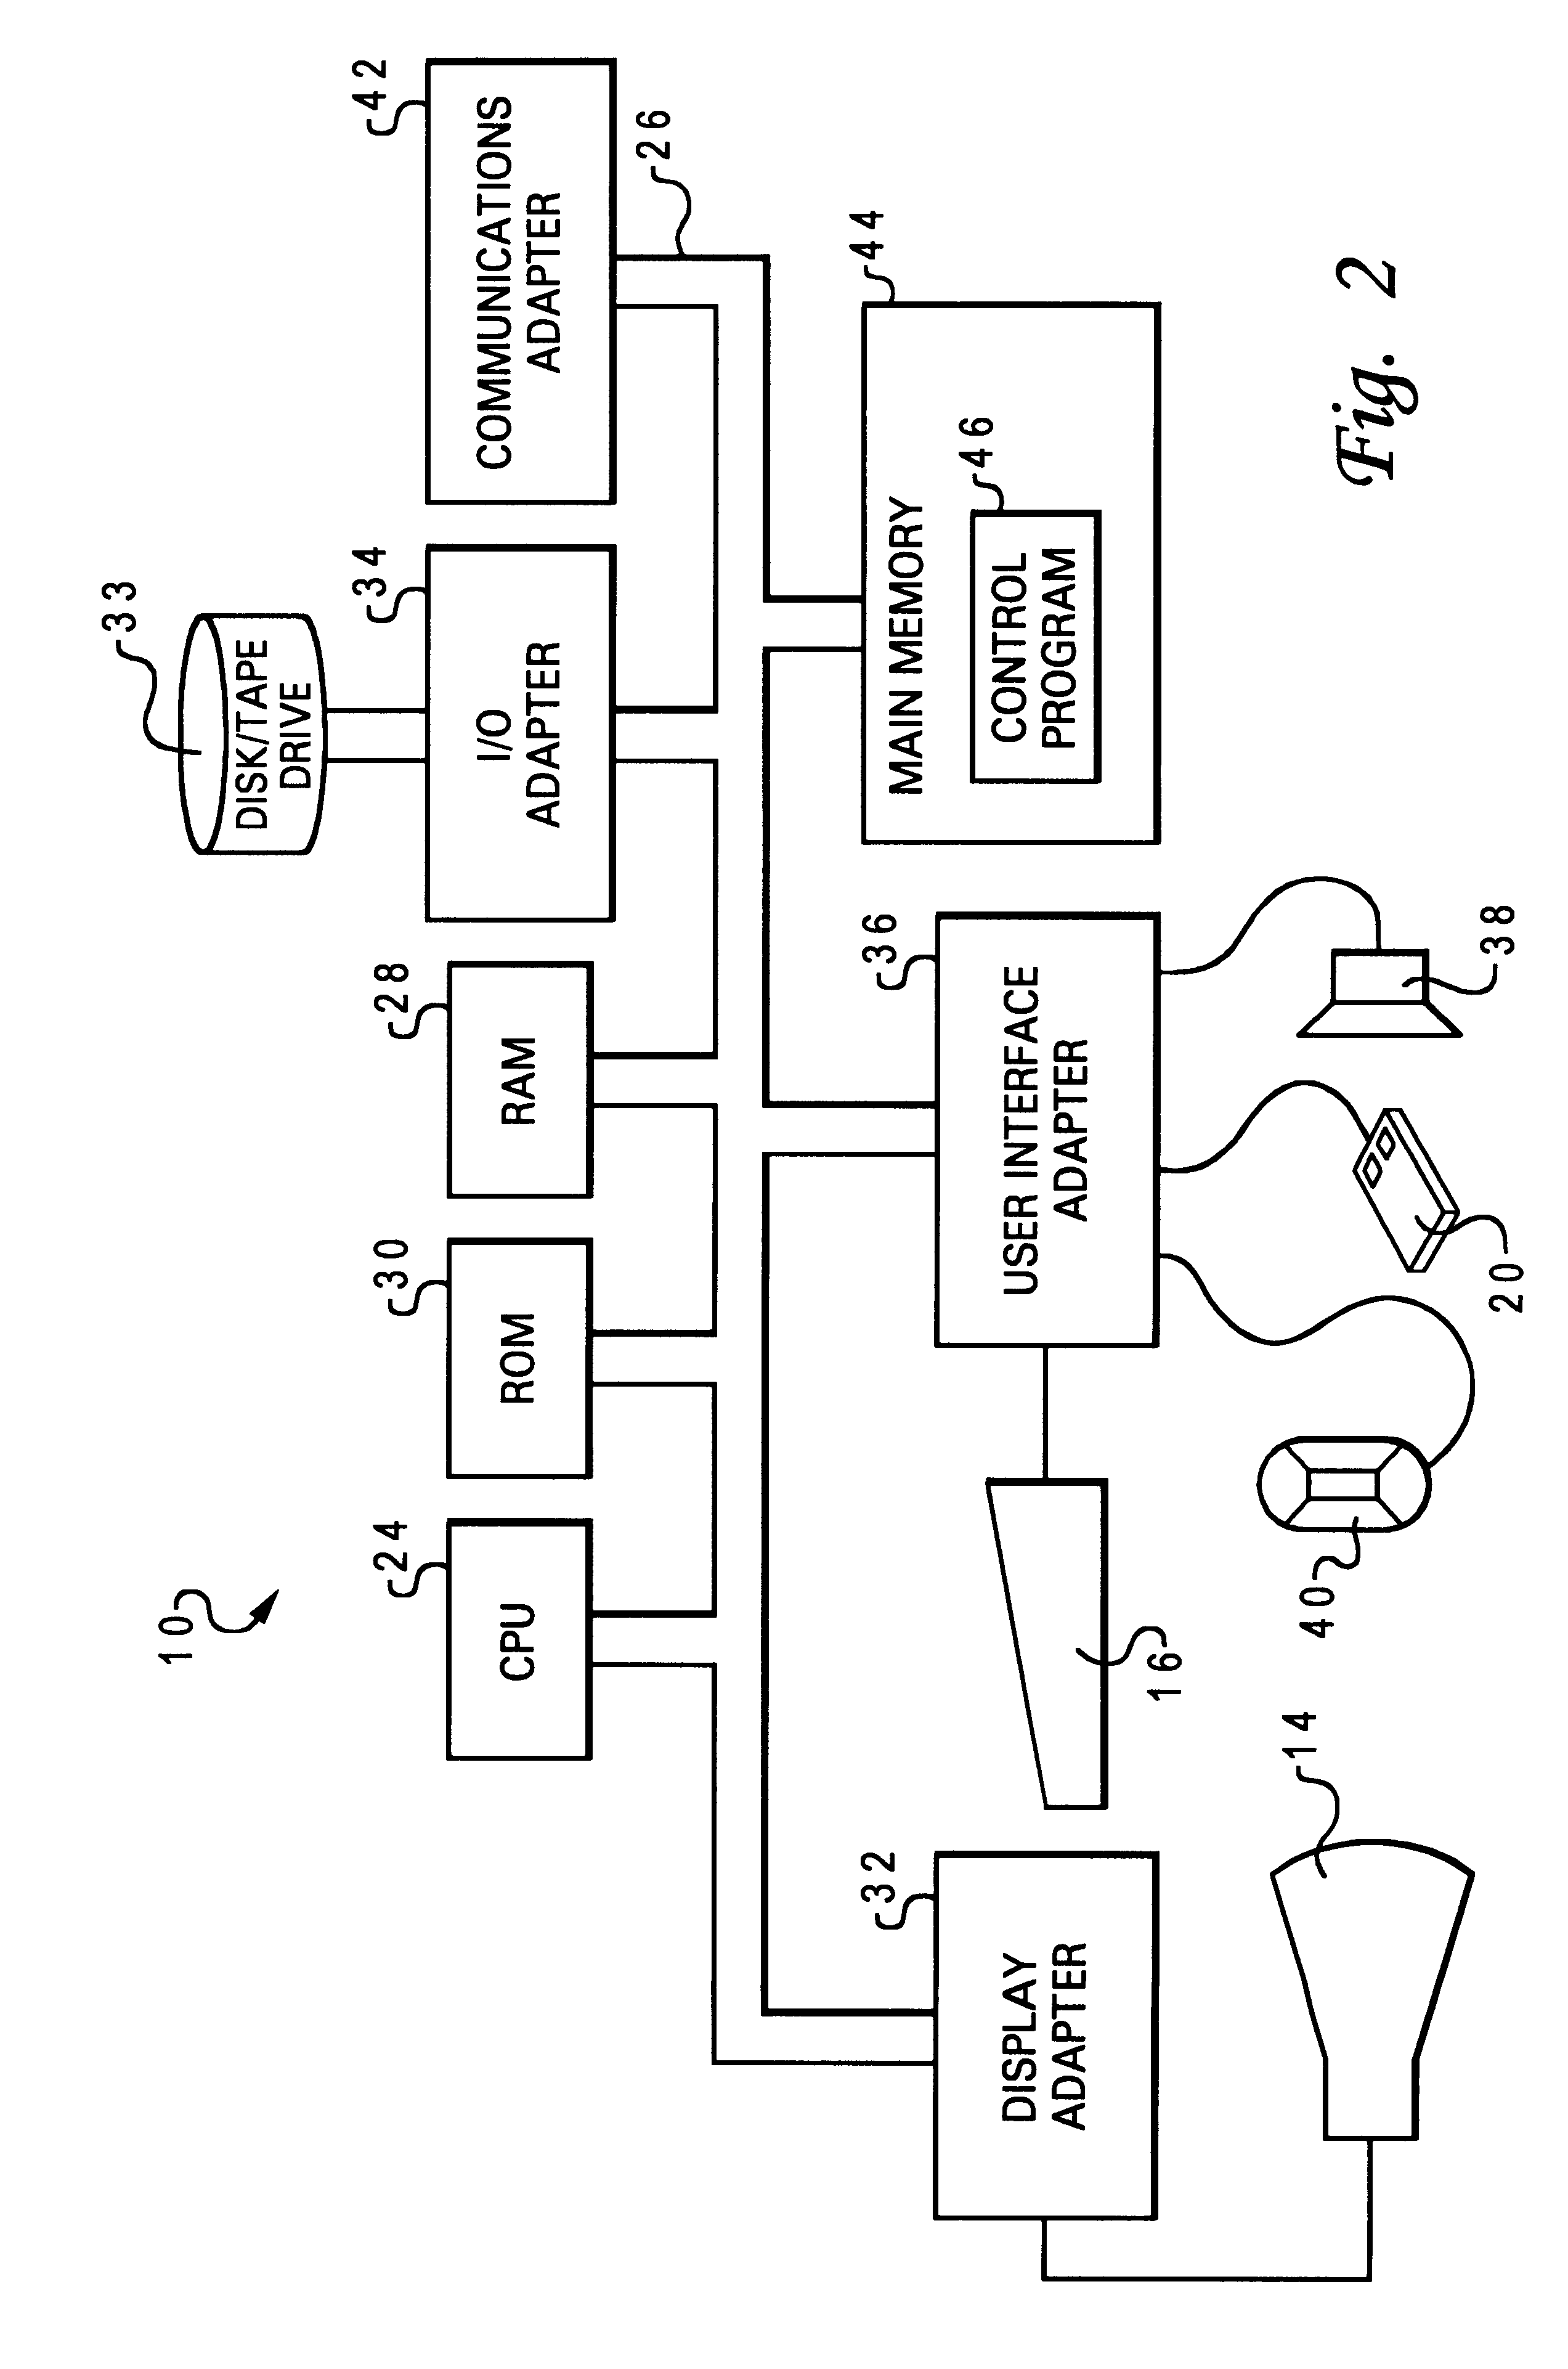 Method and system for instrumenting simulation models